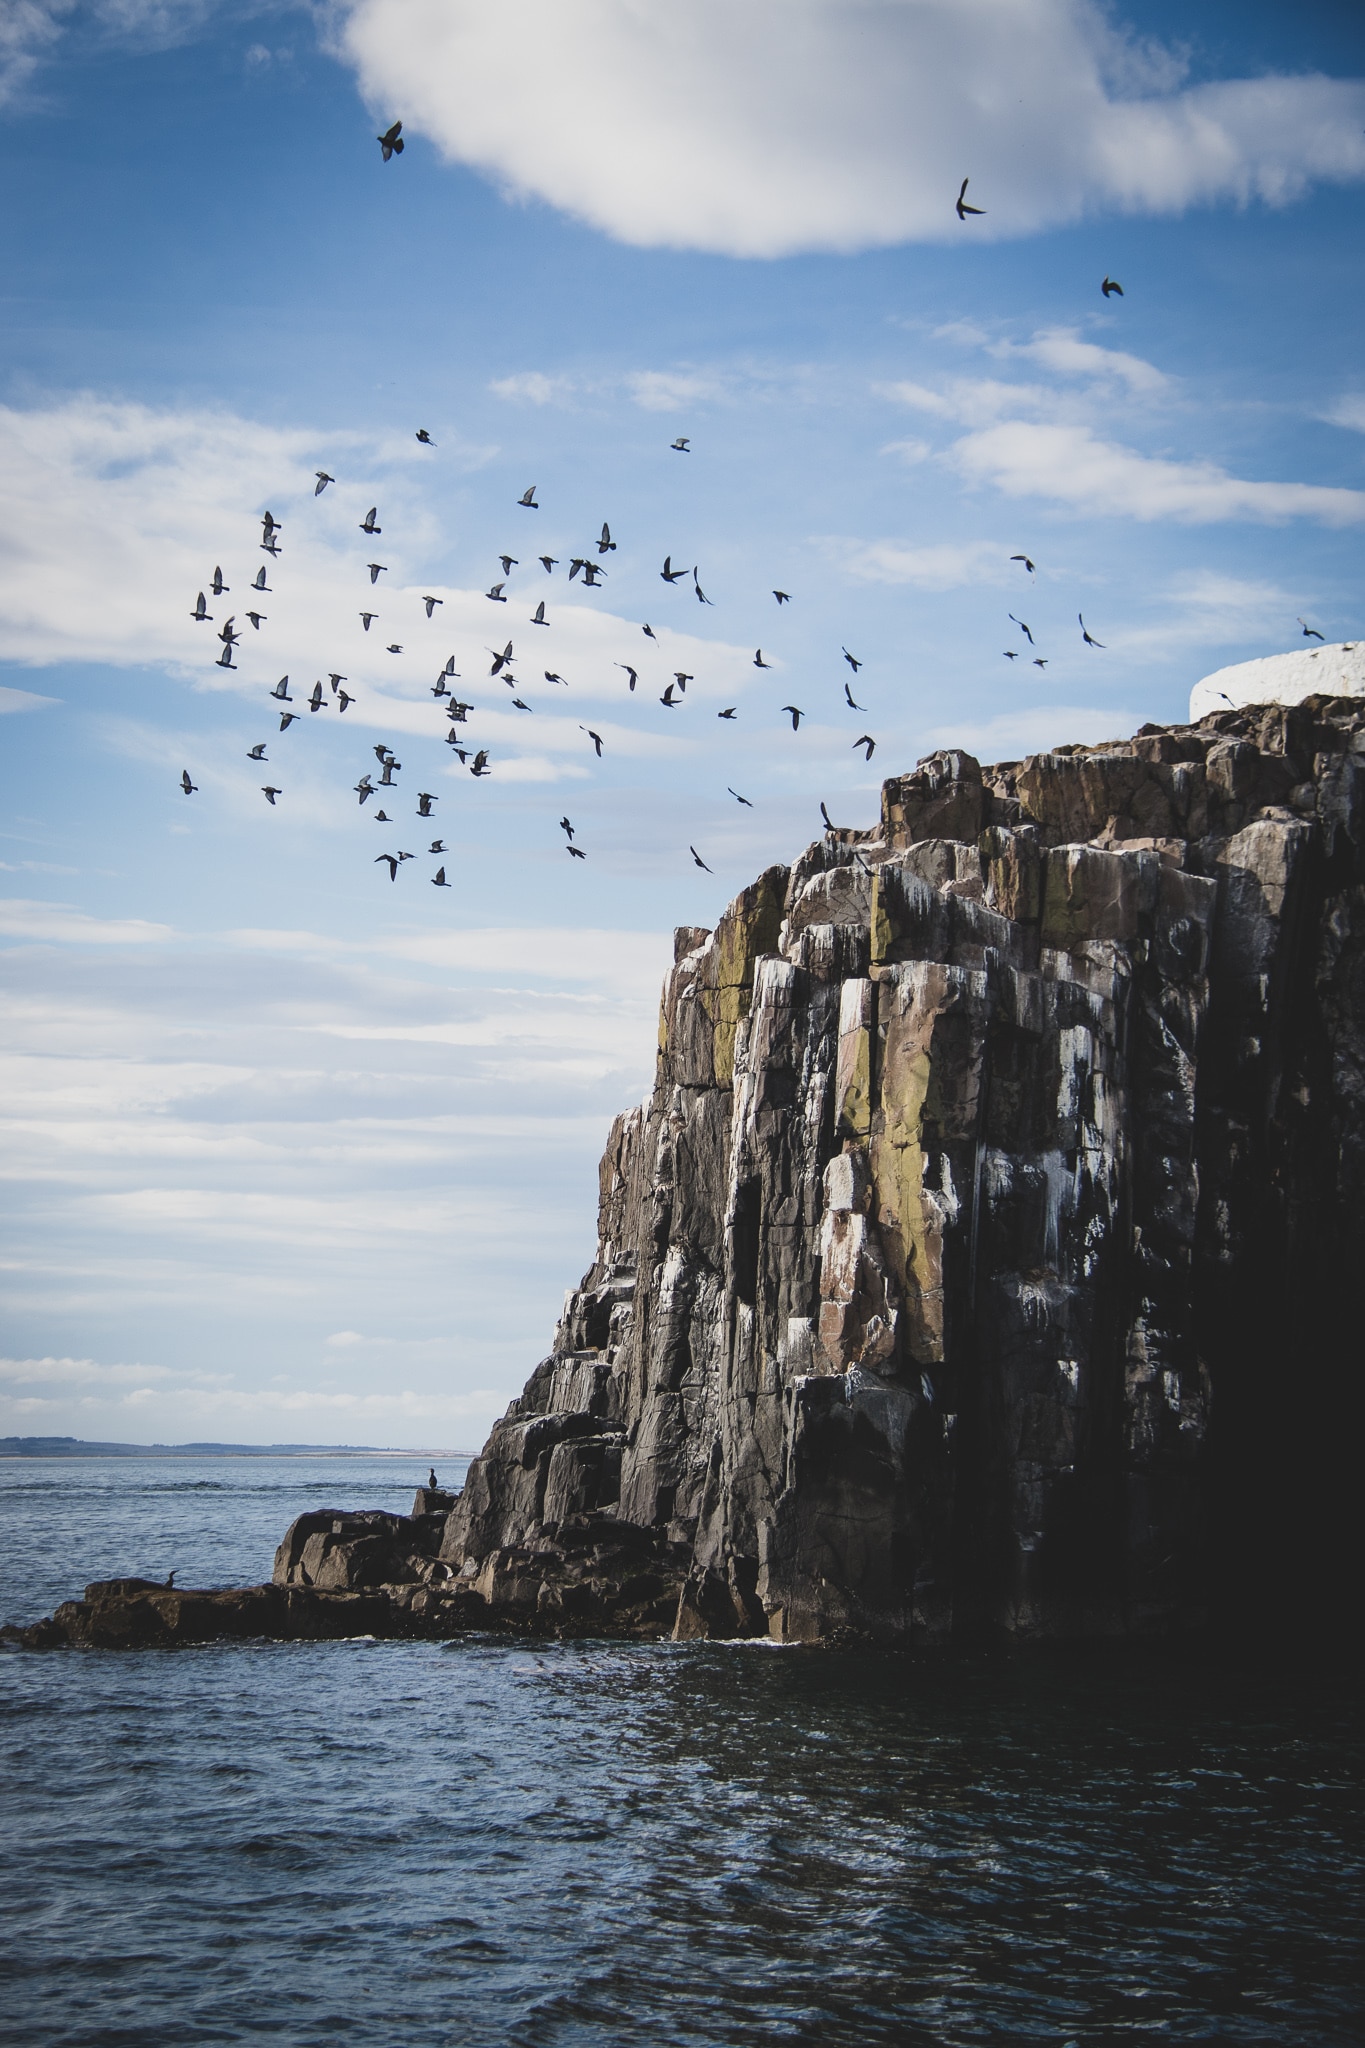 A view of the cliffs on the Inner Farne. Some of the rocks have been stained wide with guano. A flock of sea birds are flying from the cliff face and into the blue skies. Farne Islands tours are the best way of getting closer to this wildlife. 